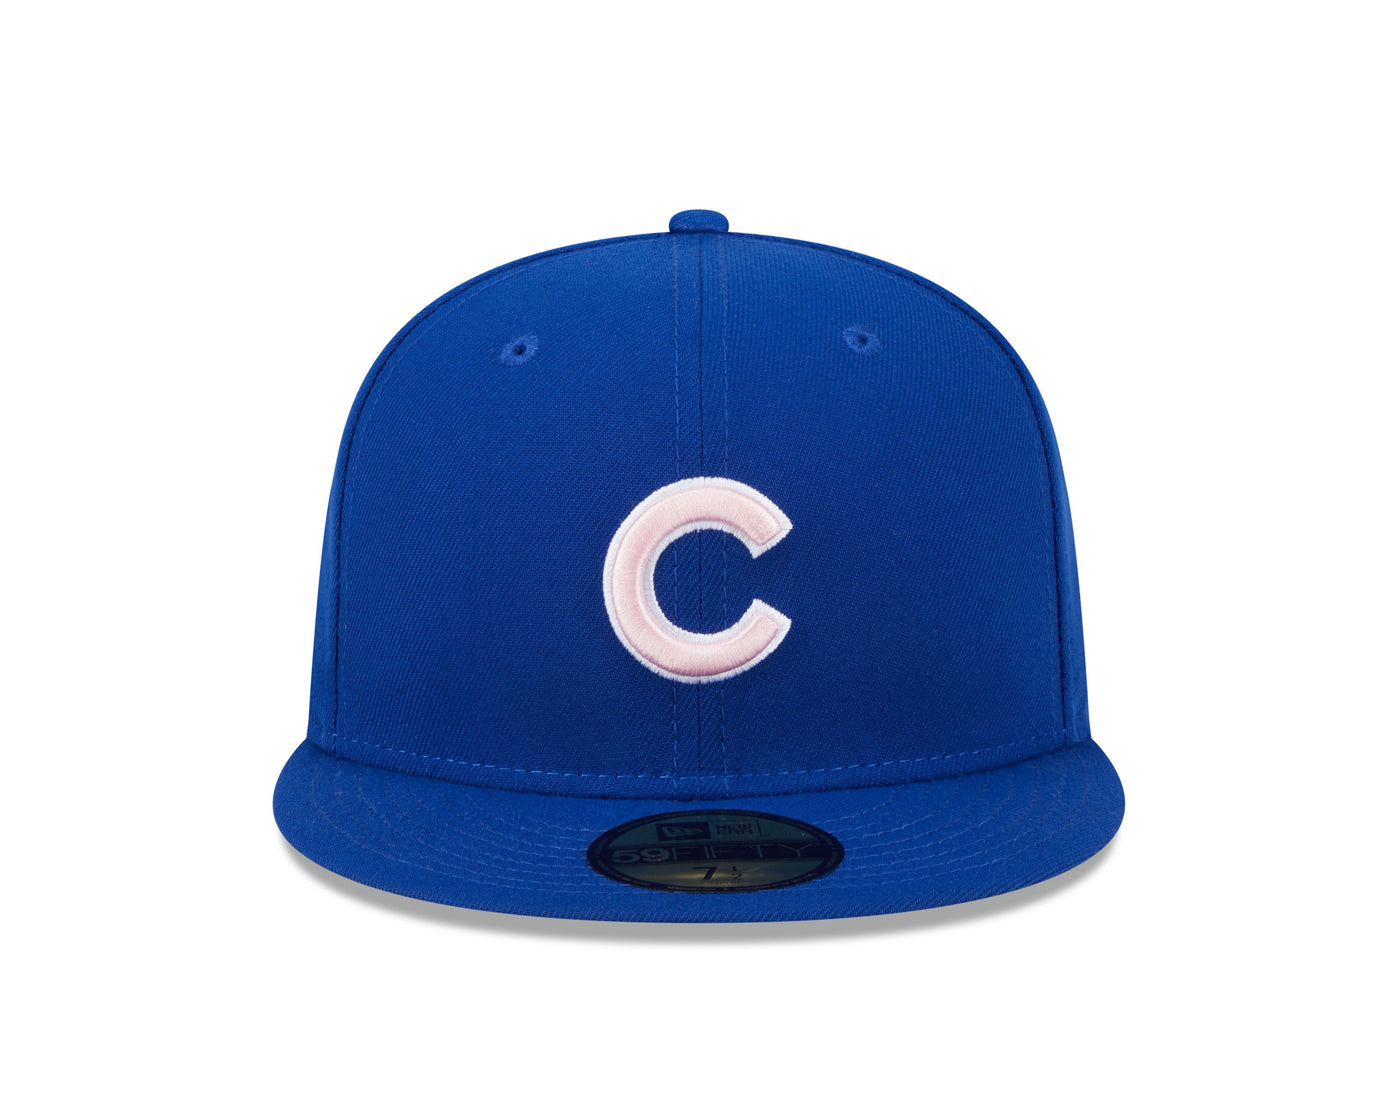 CHICAGO CUBS NEW ERA MOTHER'S DAY 59FIFTY CAP